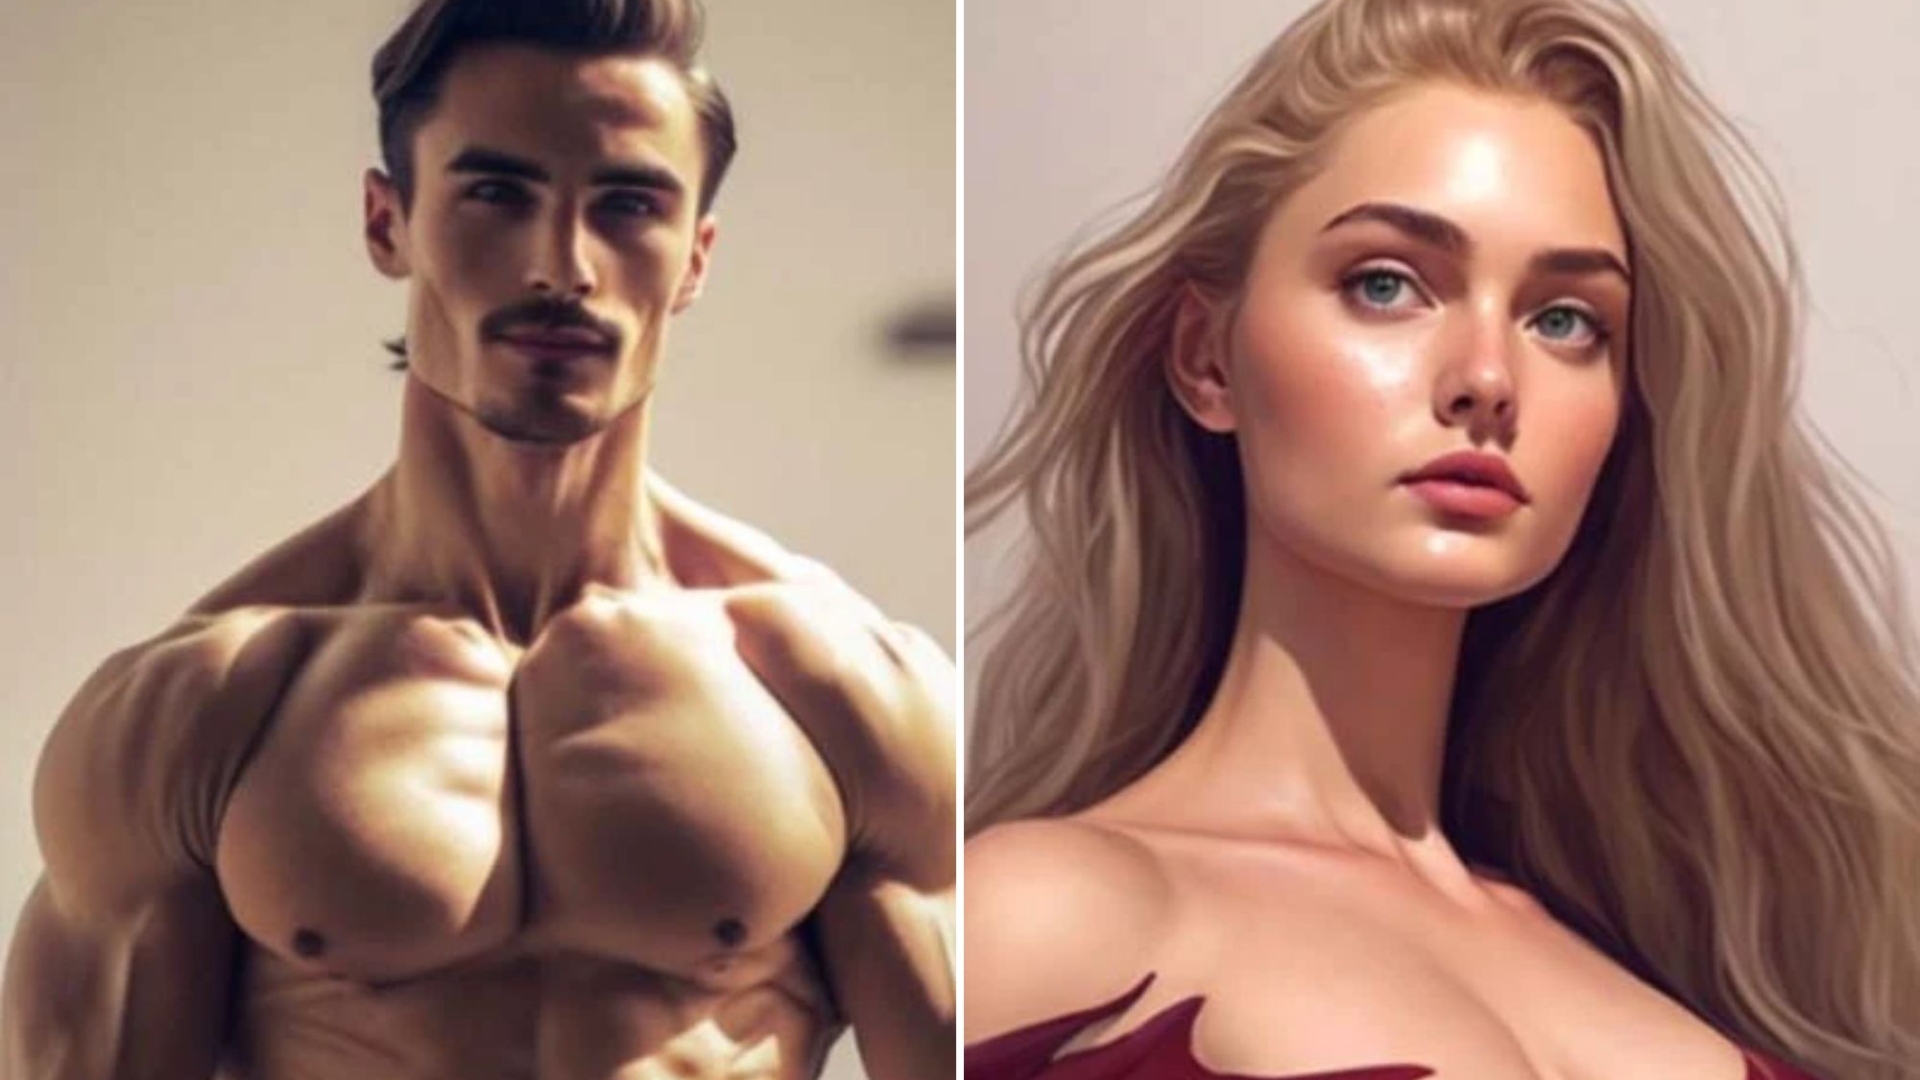 Artificial Intelligence Shows What The Perfect Man And Woman Look Like